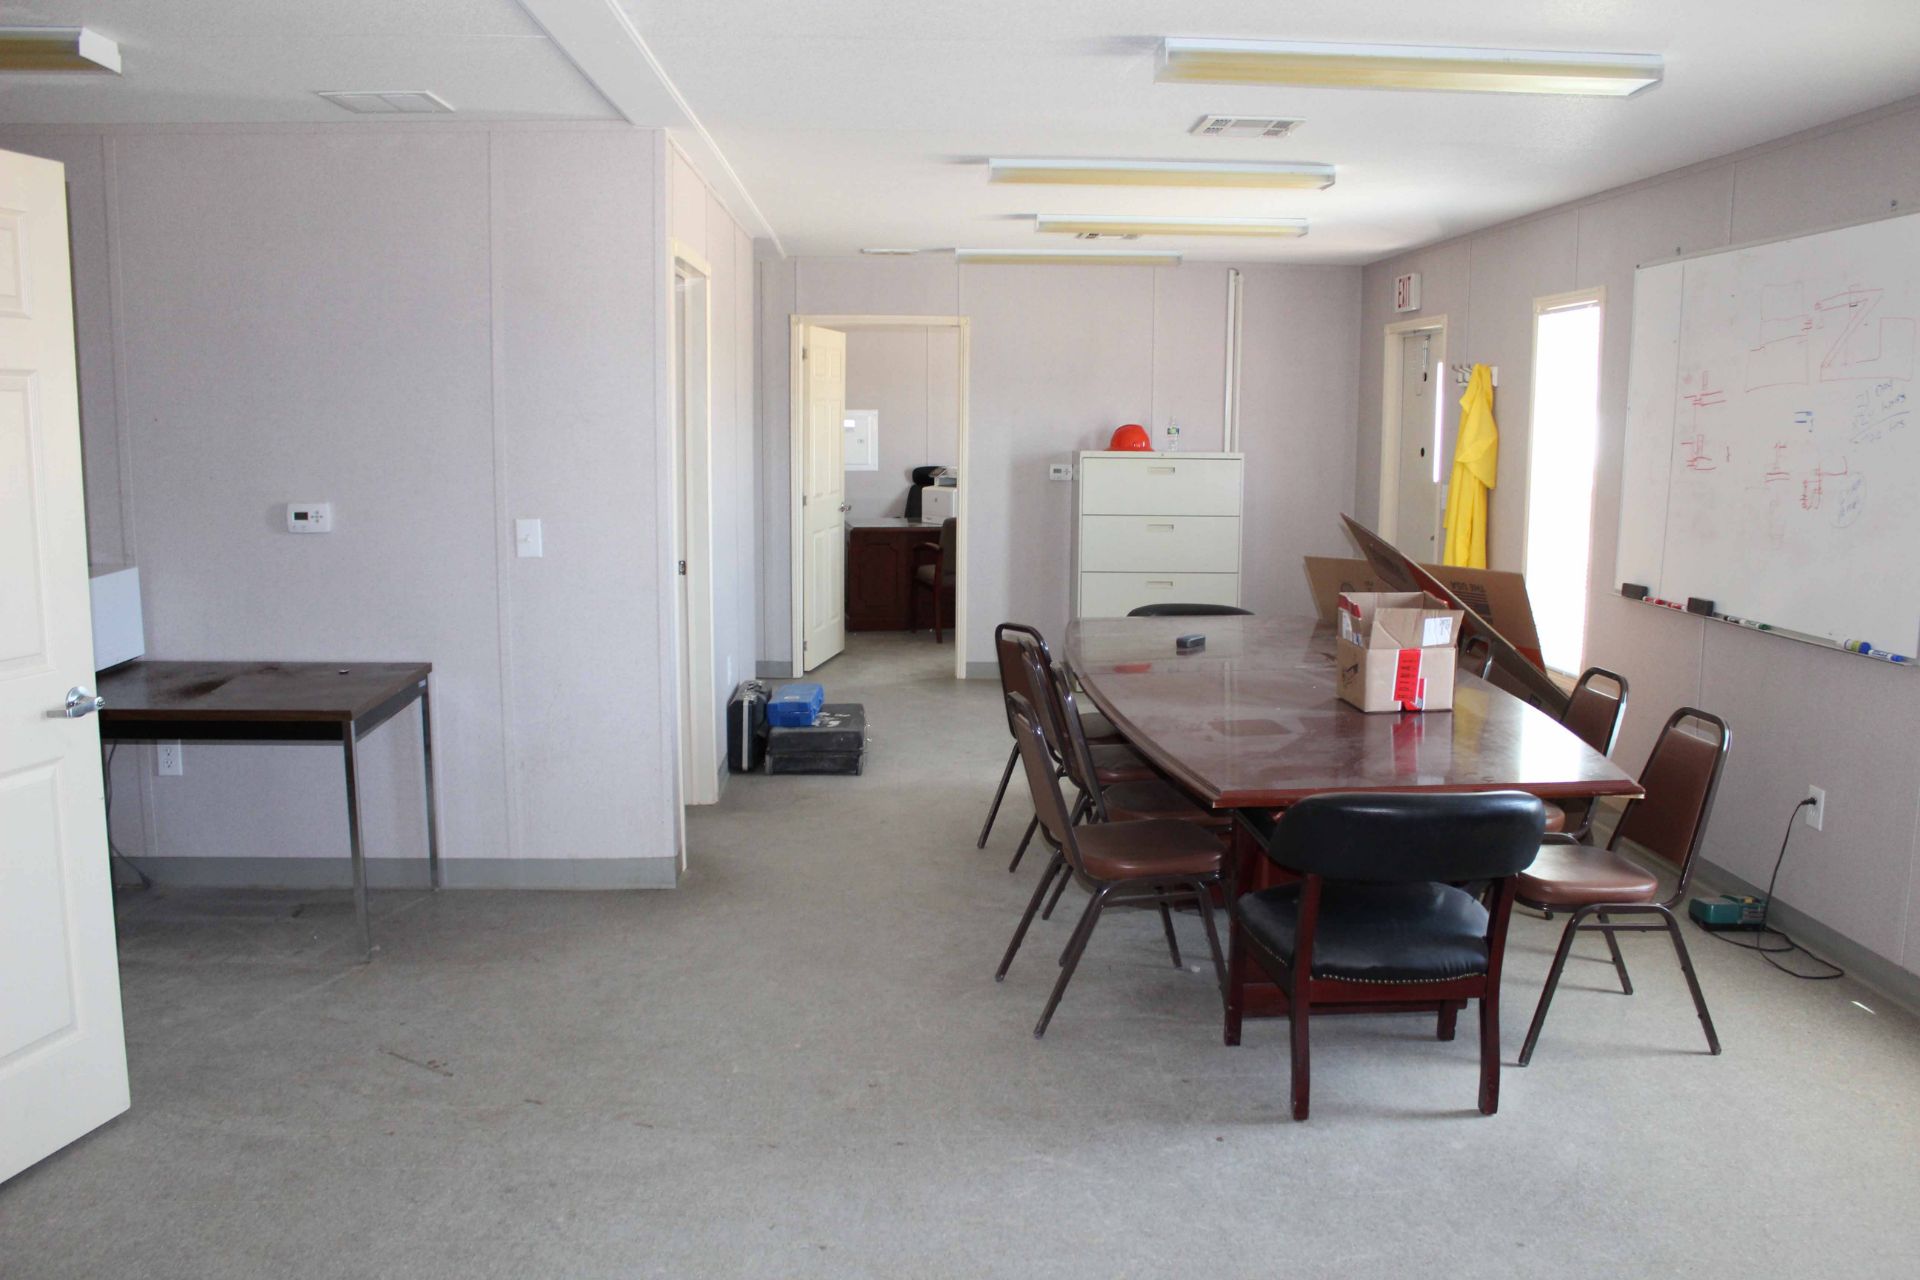 MOBILE OFFICE, 24 X 60, kitchen, bath, conference room, four offices, includes furniture - Image 7 of 11